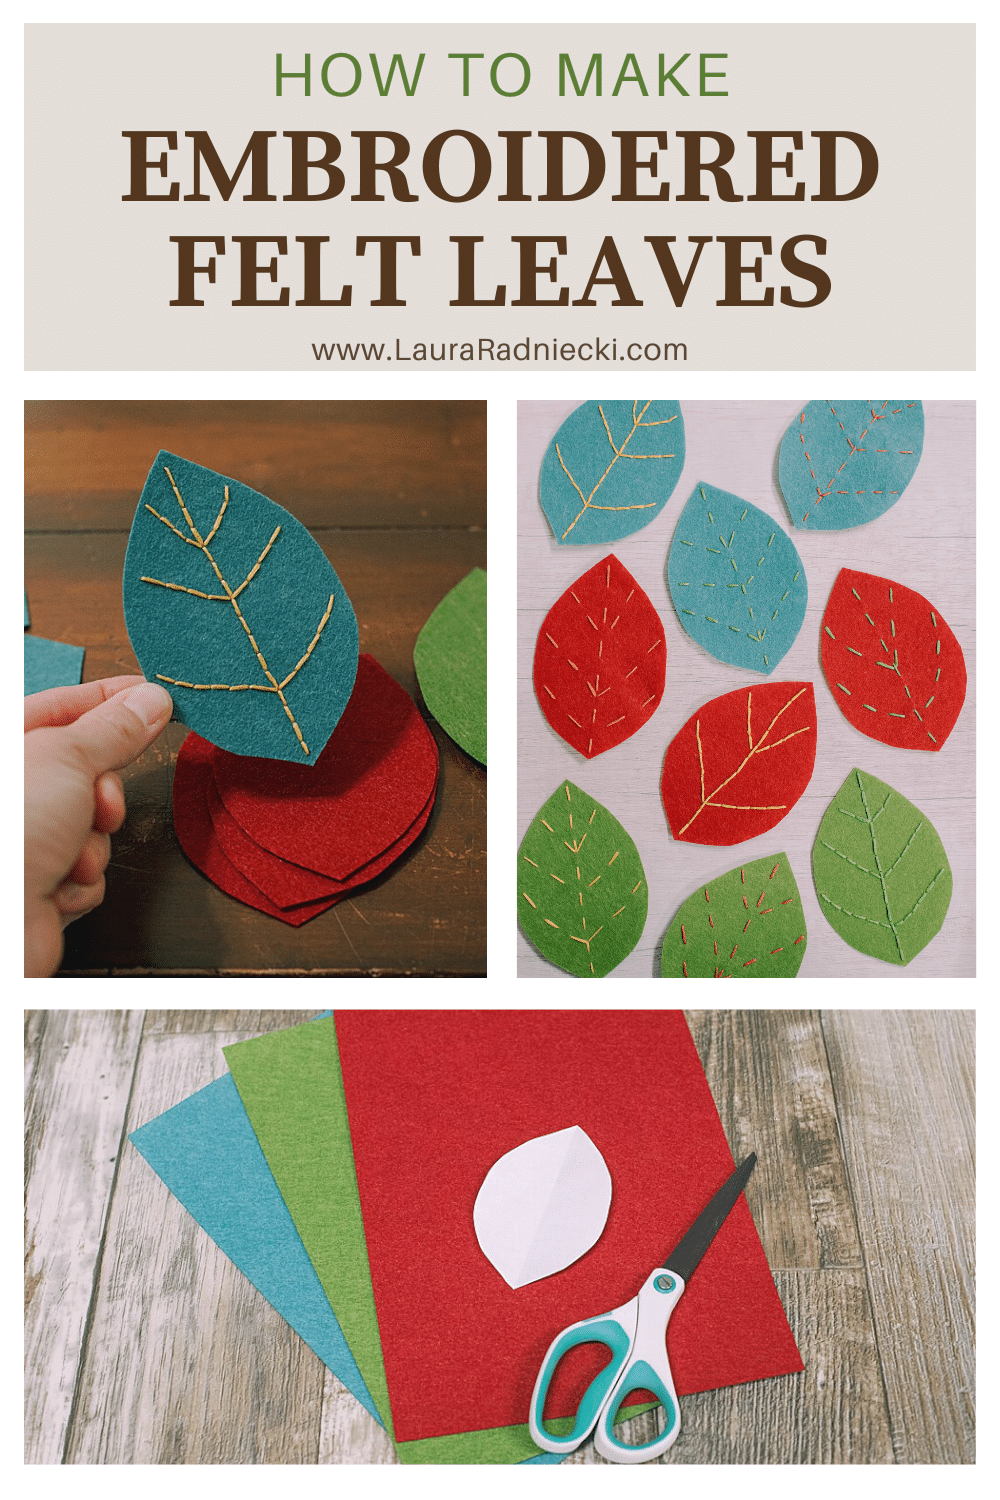 How to Make Embroidered Felt Leaves